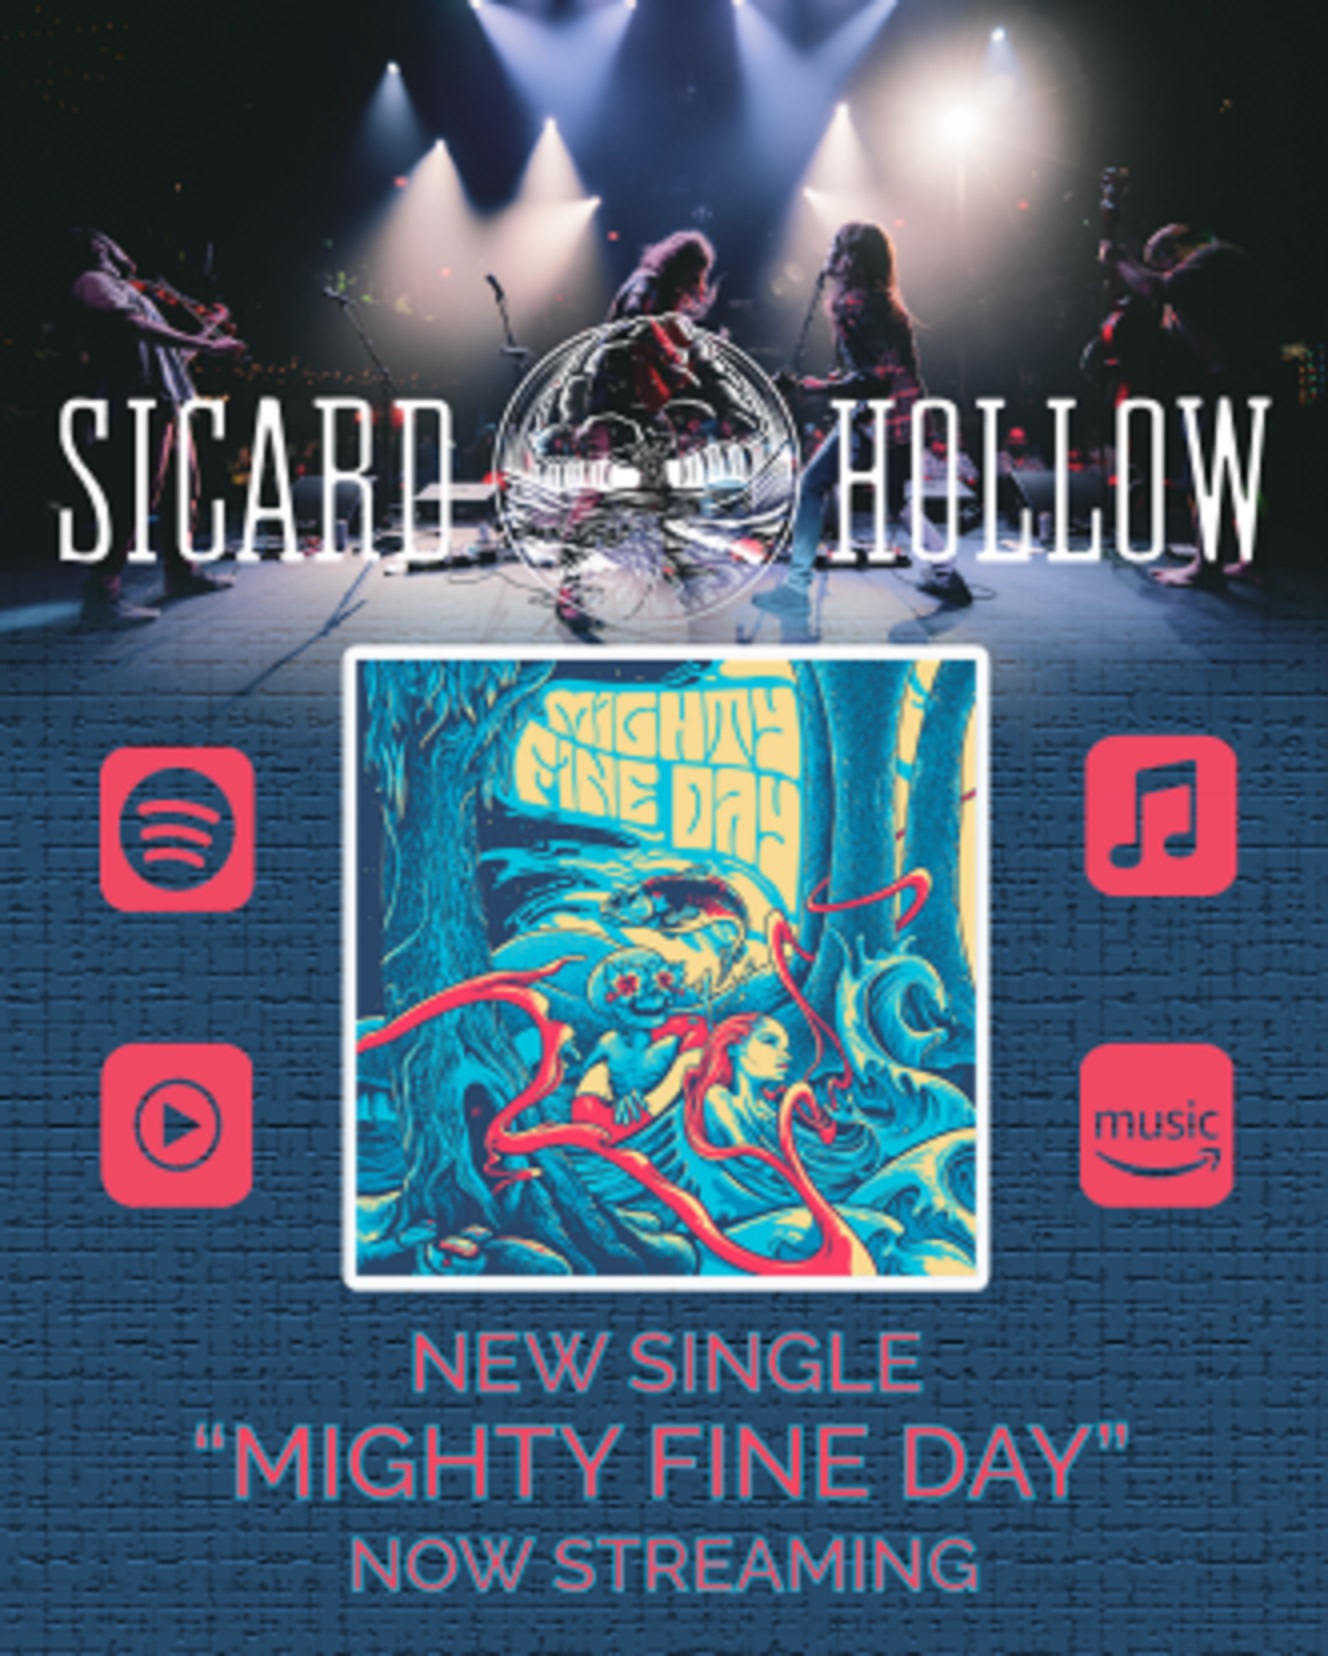 Sicard Hollow Independently Releases New Single “Mighty Fine Day”